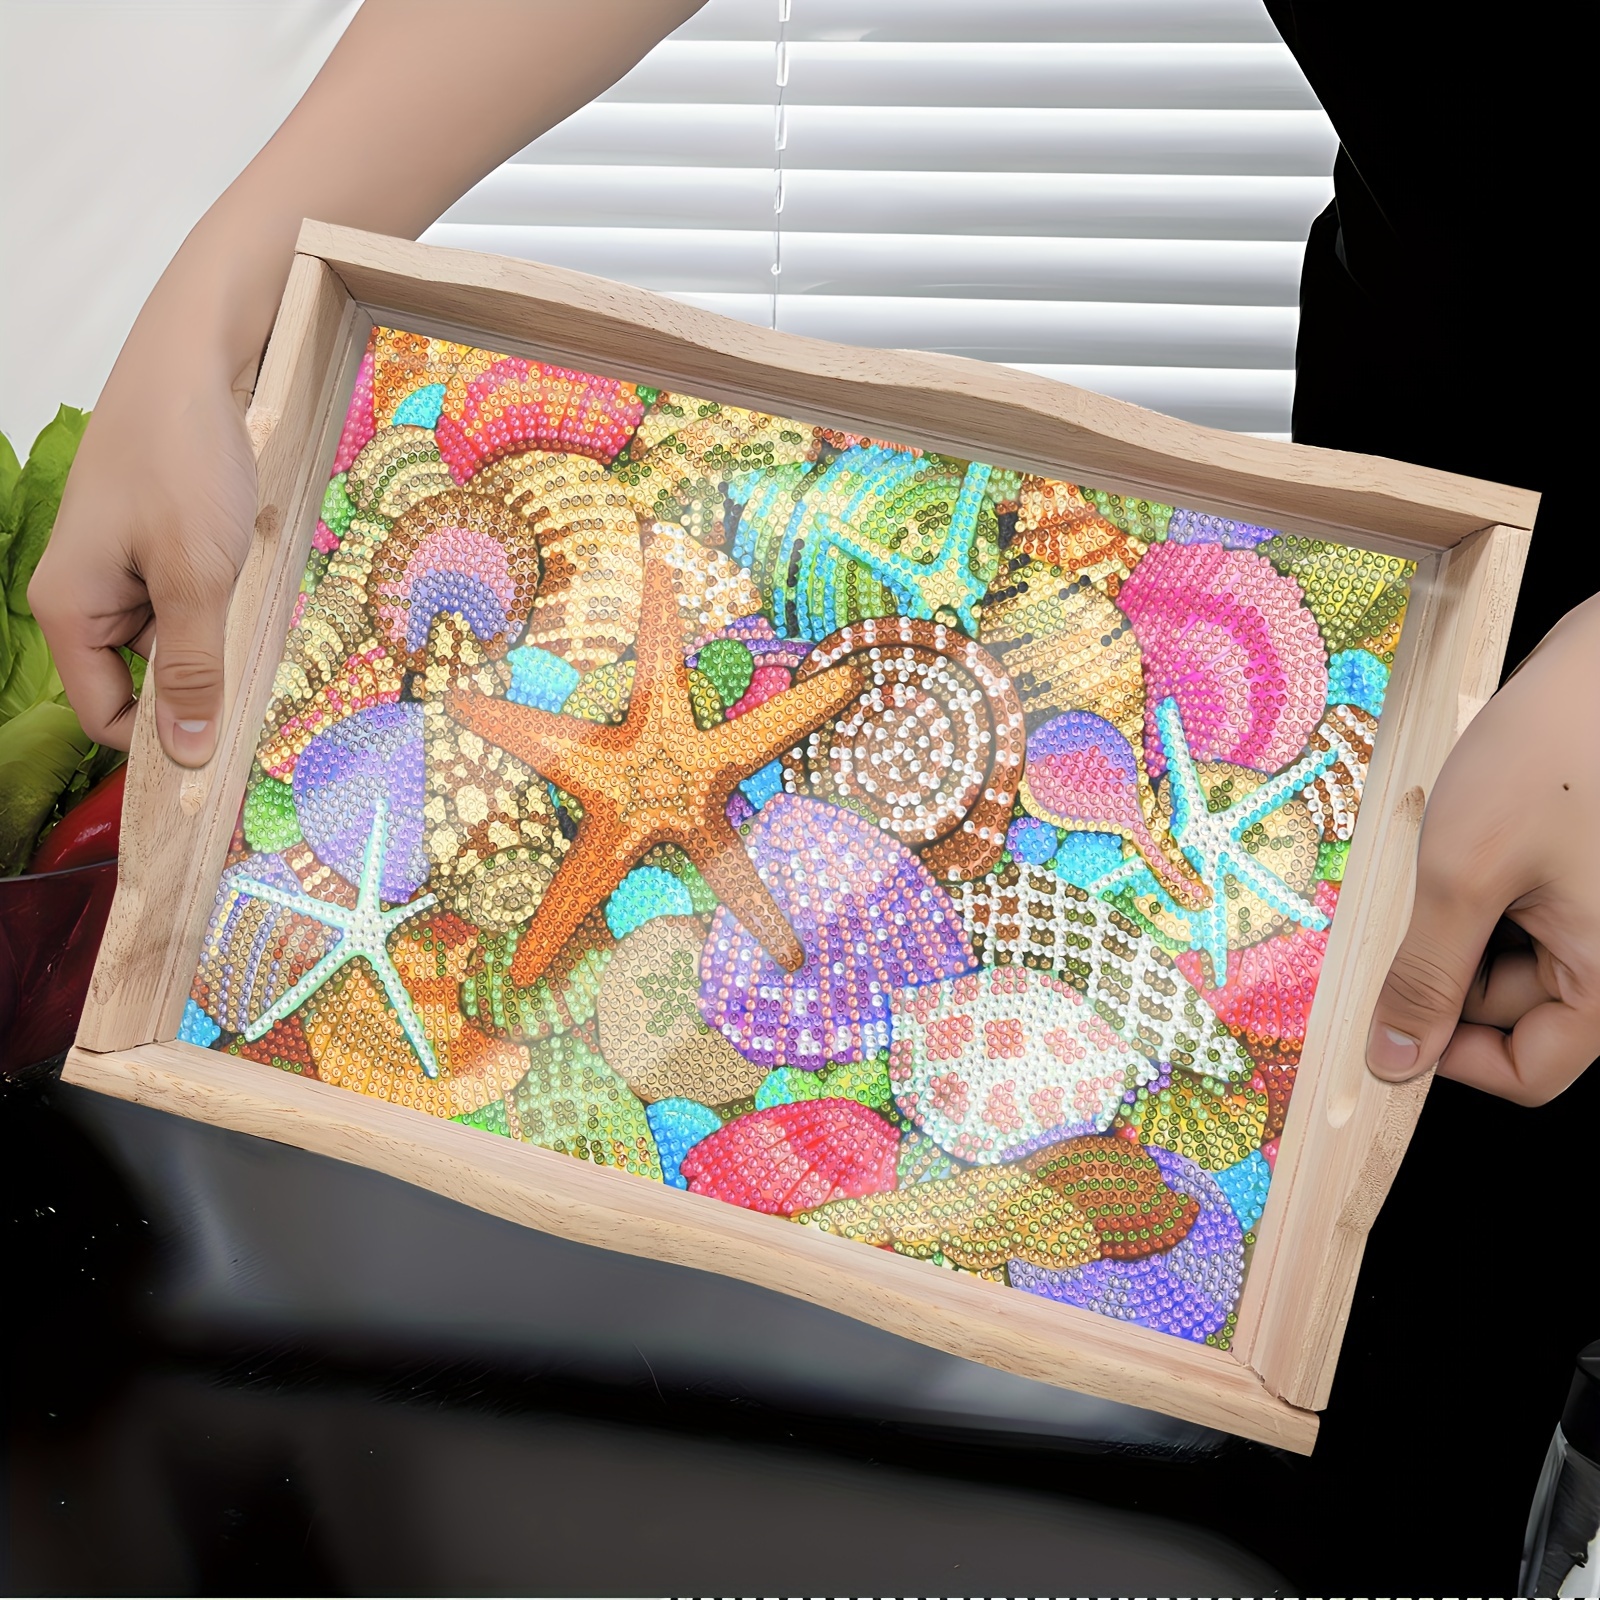 

Diy Diamond Painting Kit - Summer Beach Theme With Seashells & Starfish, Includes Framed Tray, Tools, And Accessories